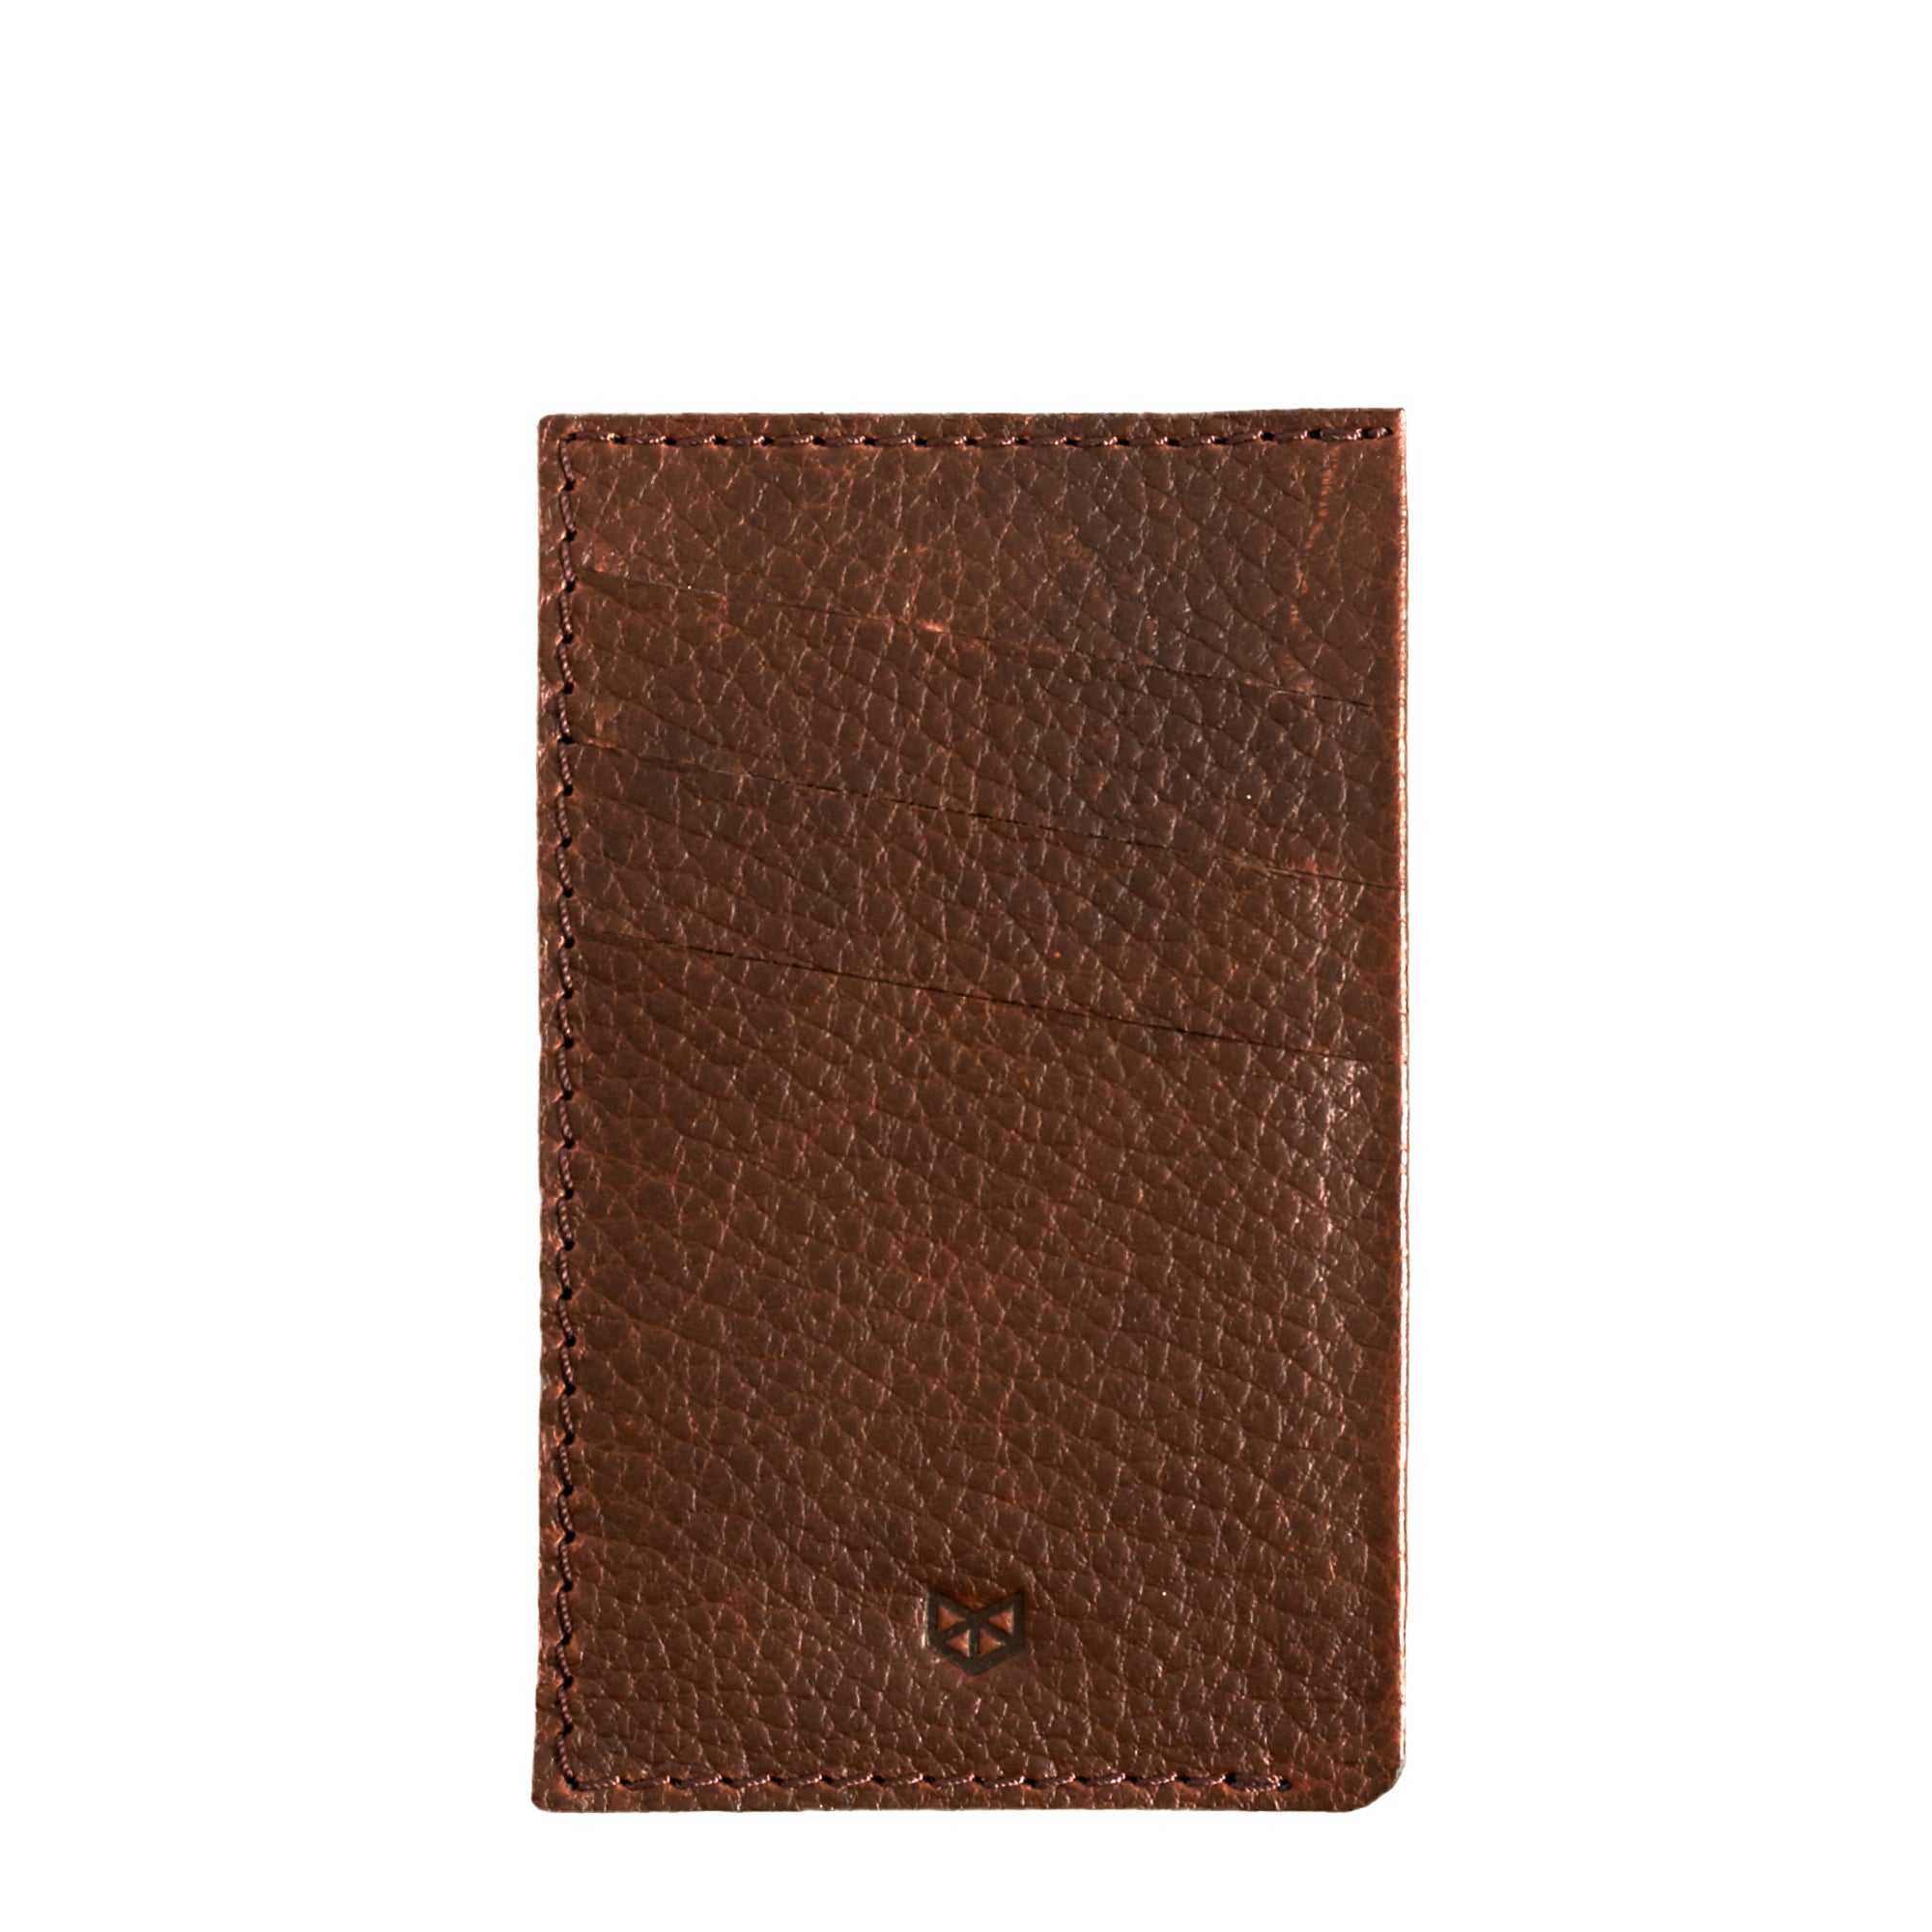 Front Cover. Card Holder Wallet Brown by Capra Leather